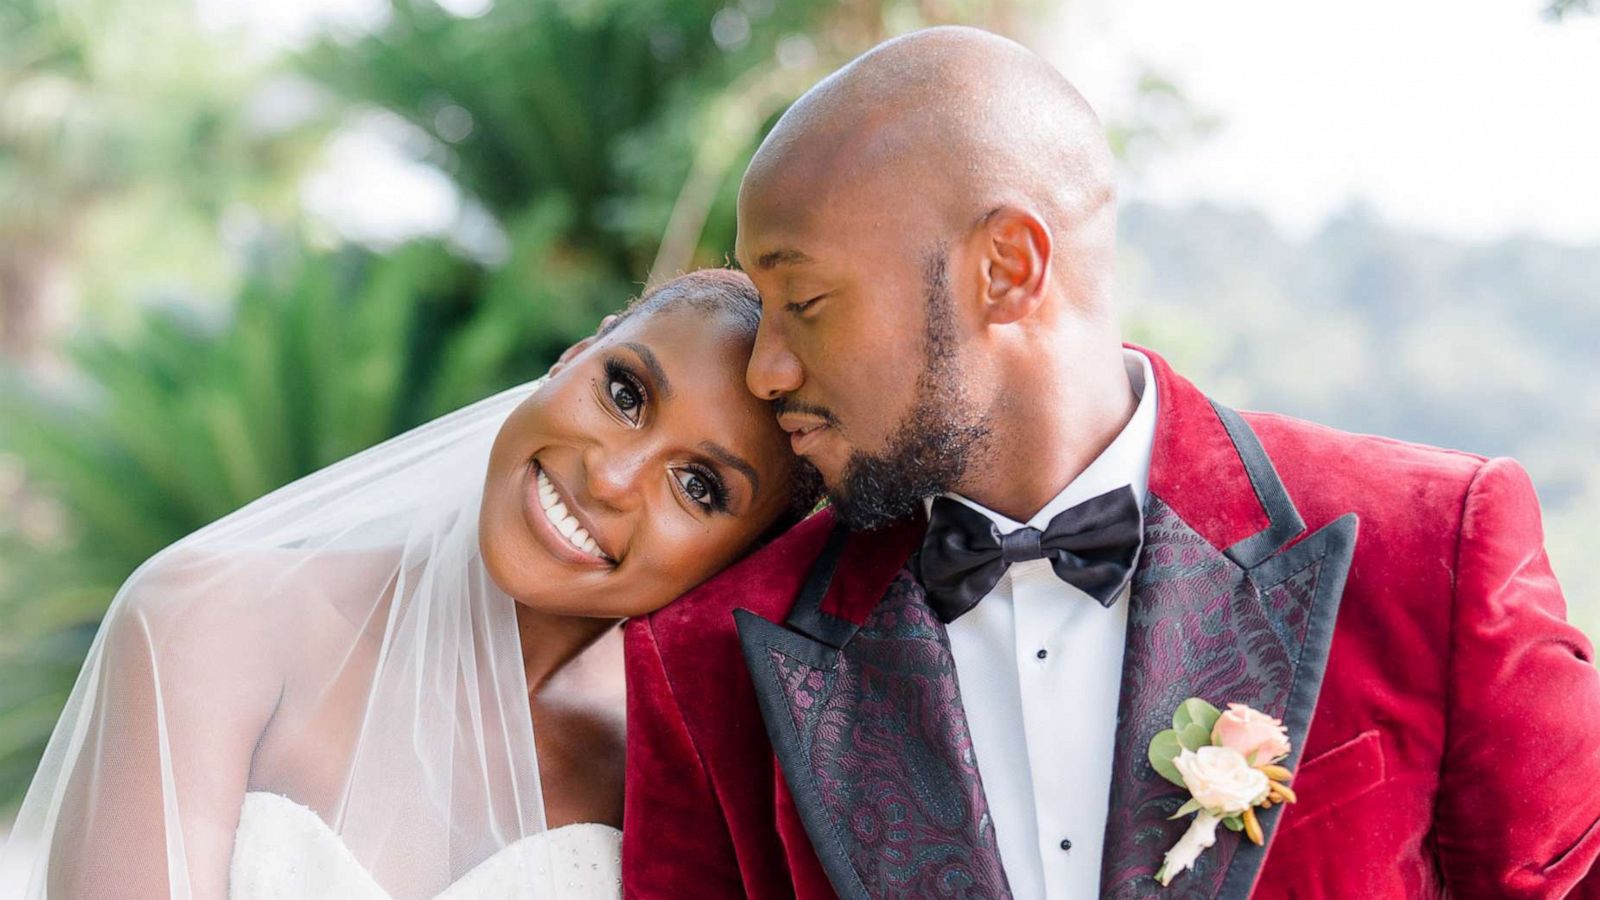 PHOTO: Issa Rae and Louis Diame are pictured on their wedding day, July 25th, 2021 in the South of France. The bride wore a custom Vera Wang Haute gown and the groom Louis Diame wore a custom Dolce & Gabanna tux.